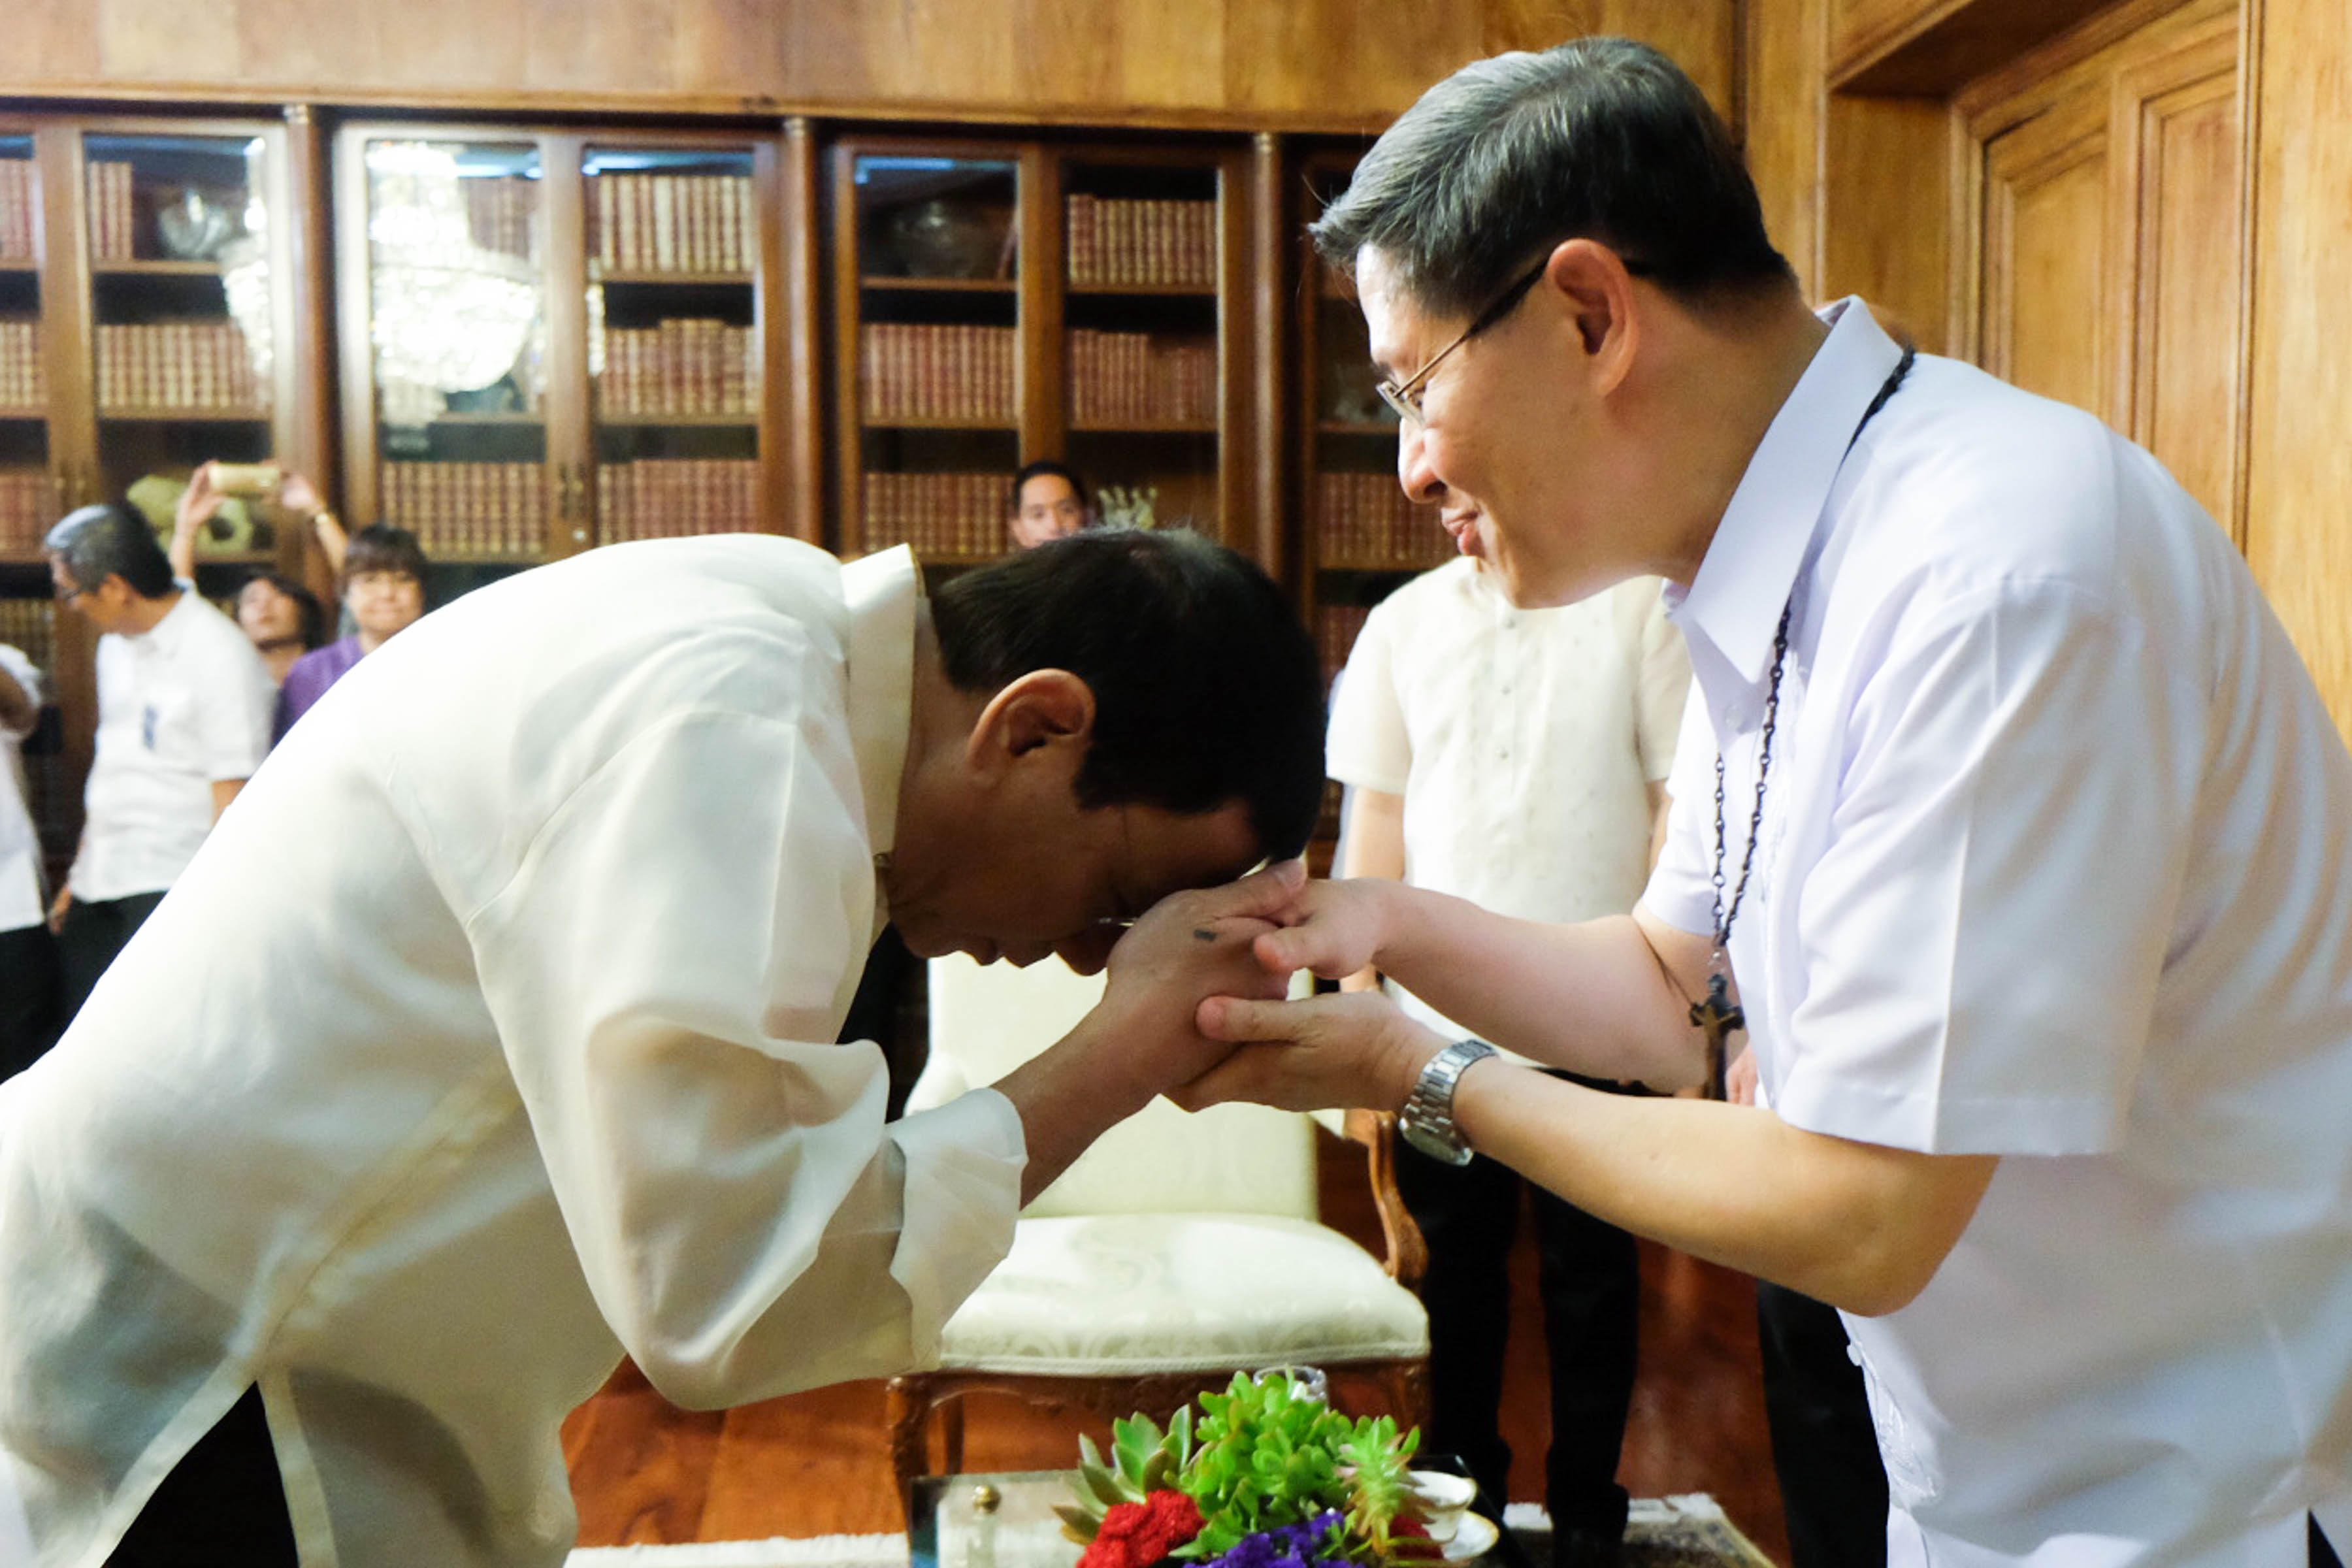 RECONCILIATION? President Rodrigo Duterte places his forehead on Cardinal Luis Antonio Tagle's hand to show respect during a meeting at the Study Room of the Malacañang Palace on Tuesday July 19, 2016. Photo by KIWI BULACLAC/PND 